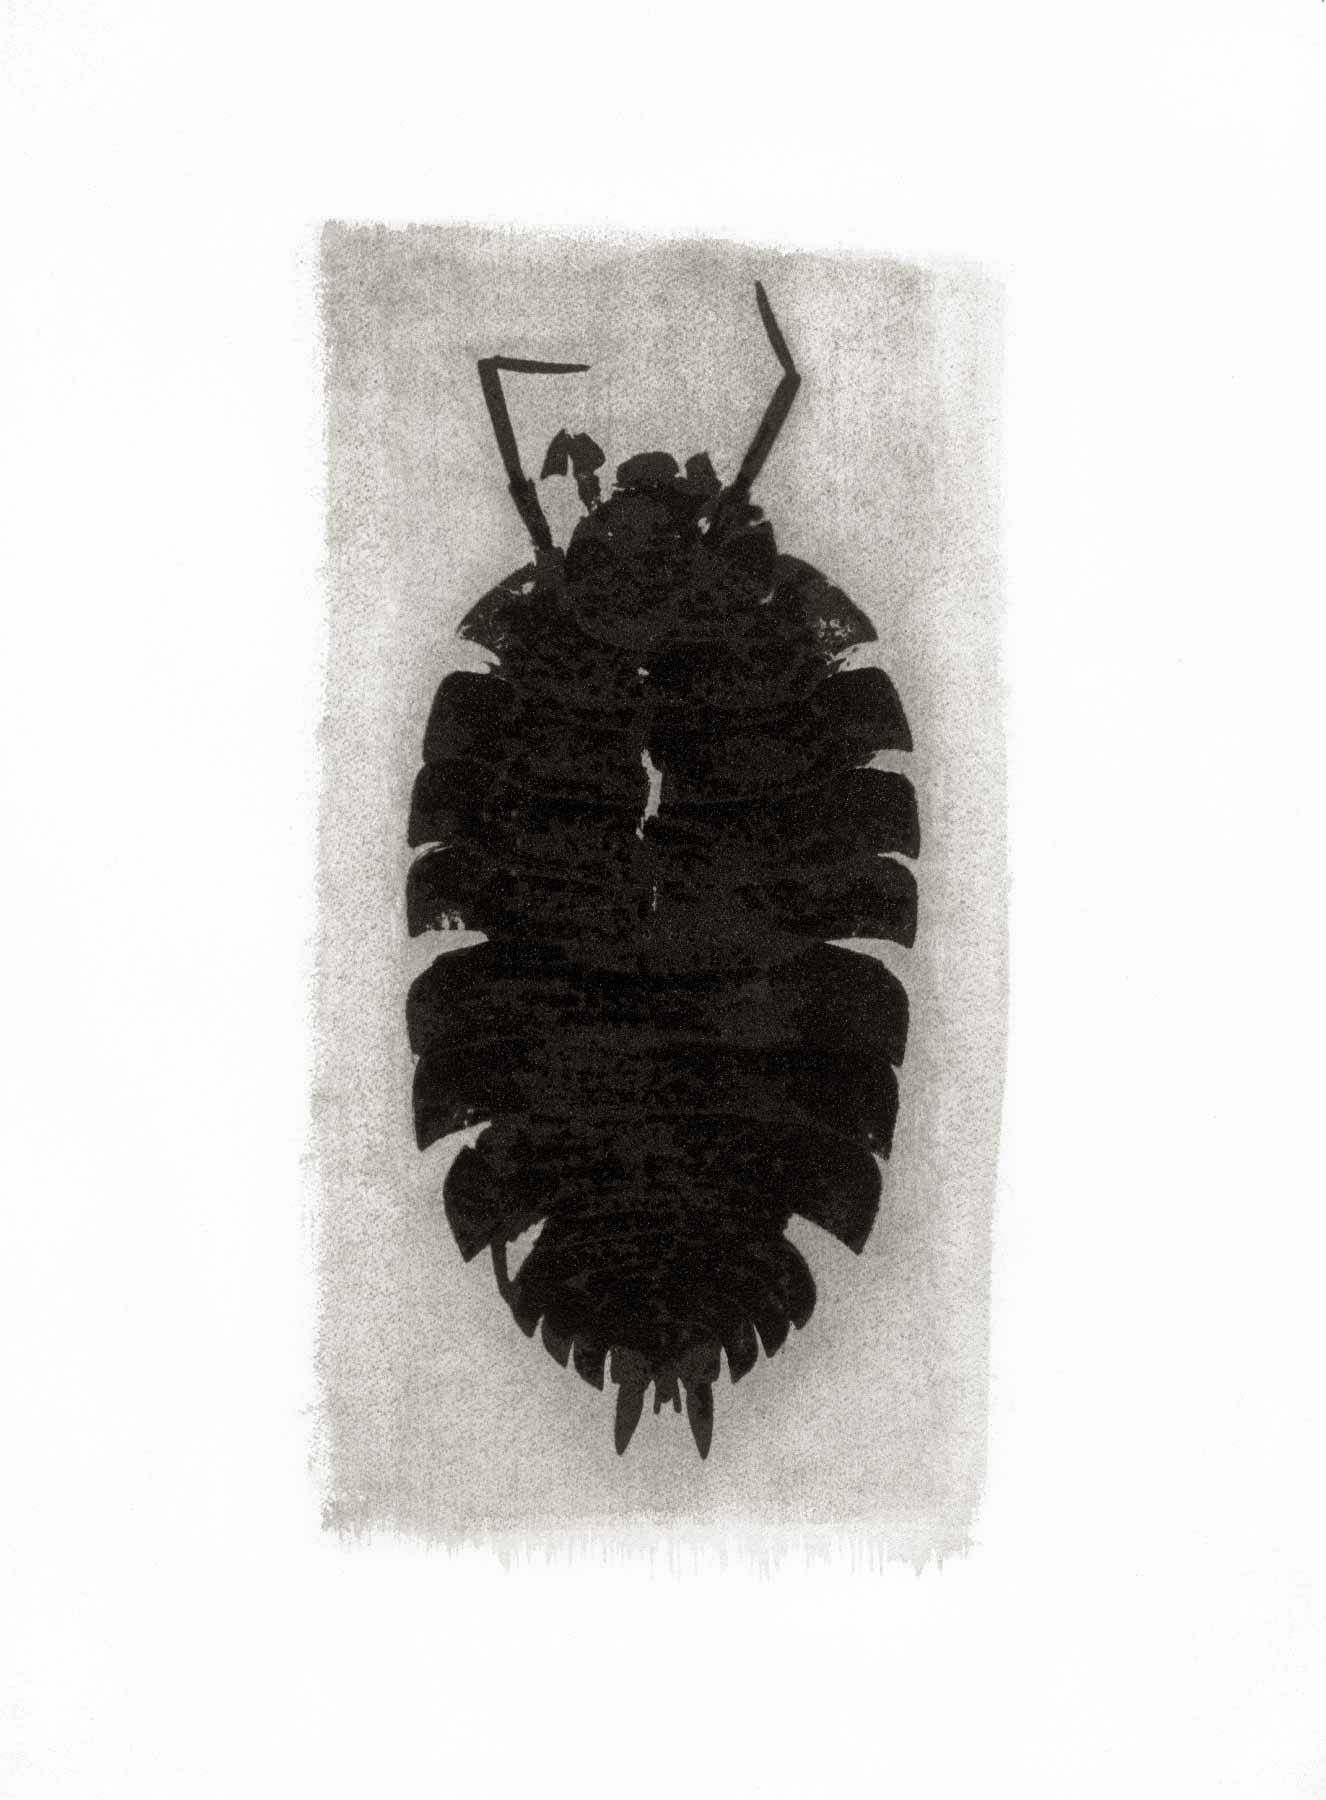 Gum bichromate insect - Woodlouse 1993